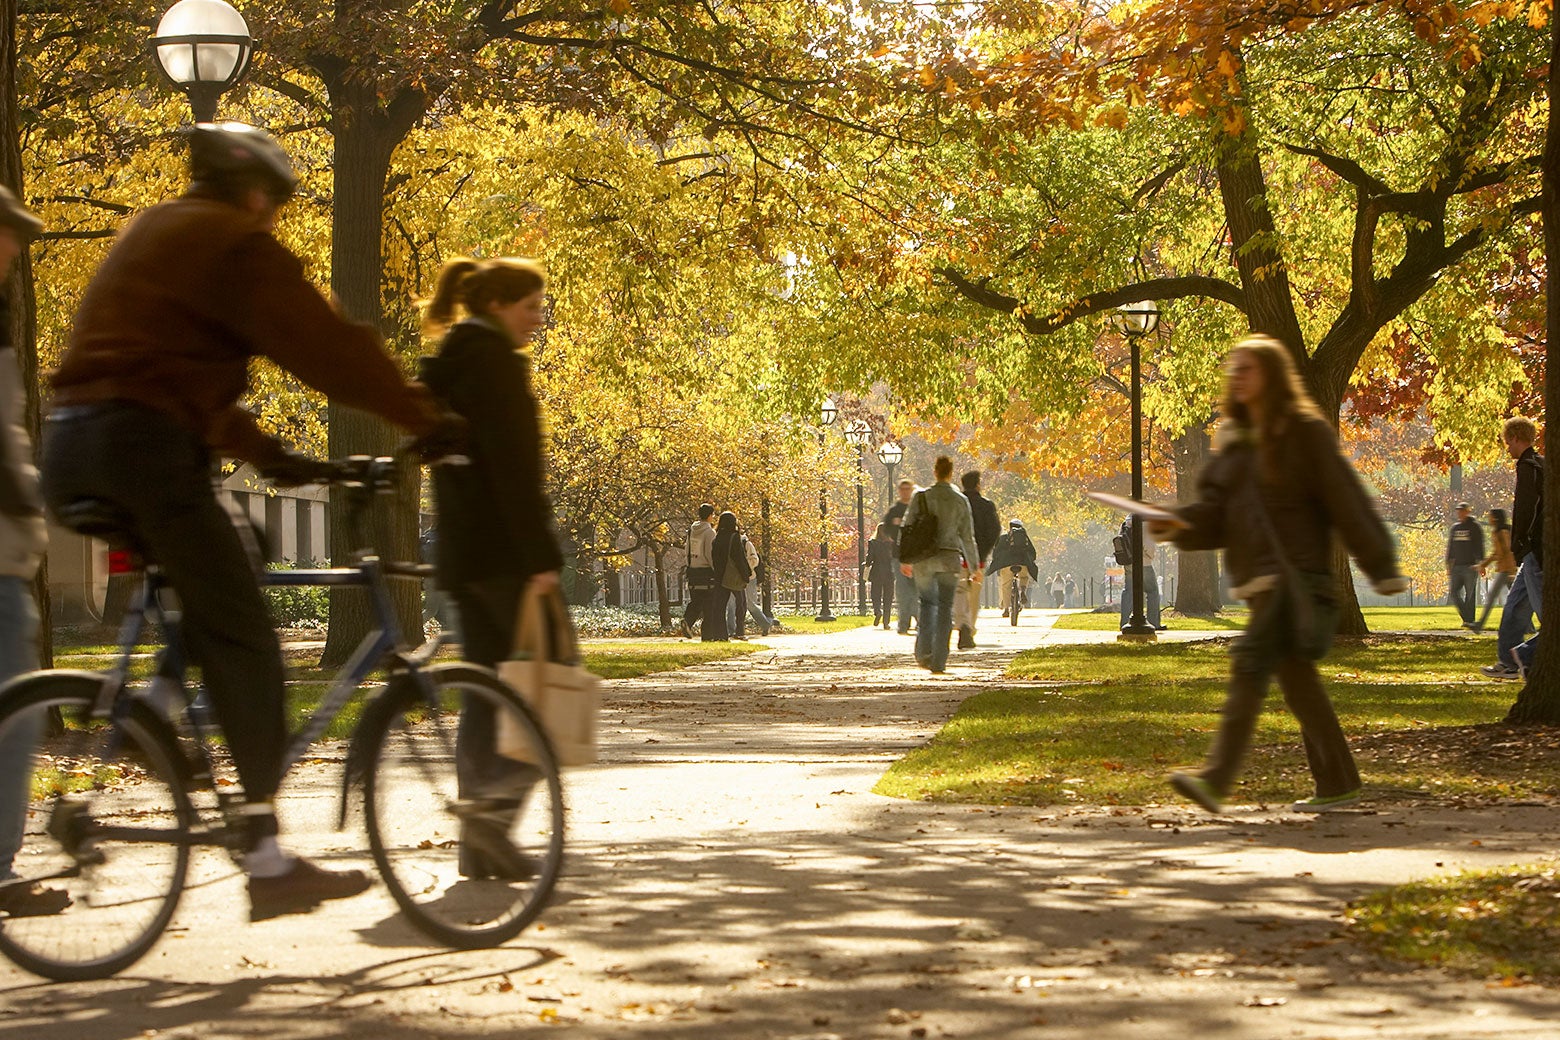 Students walking and riding bikes on footpaths surrounded by trees and fallen leaves